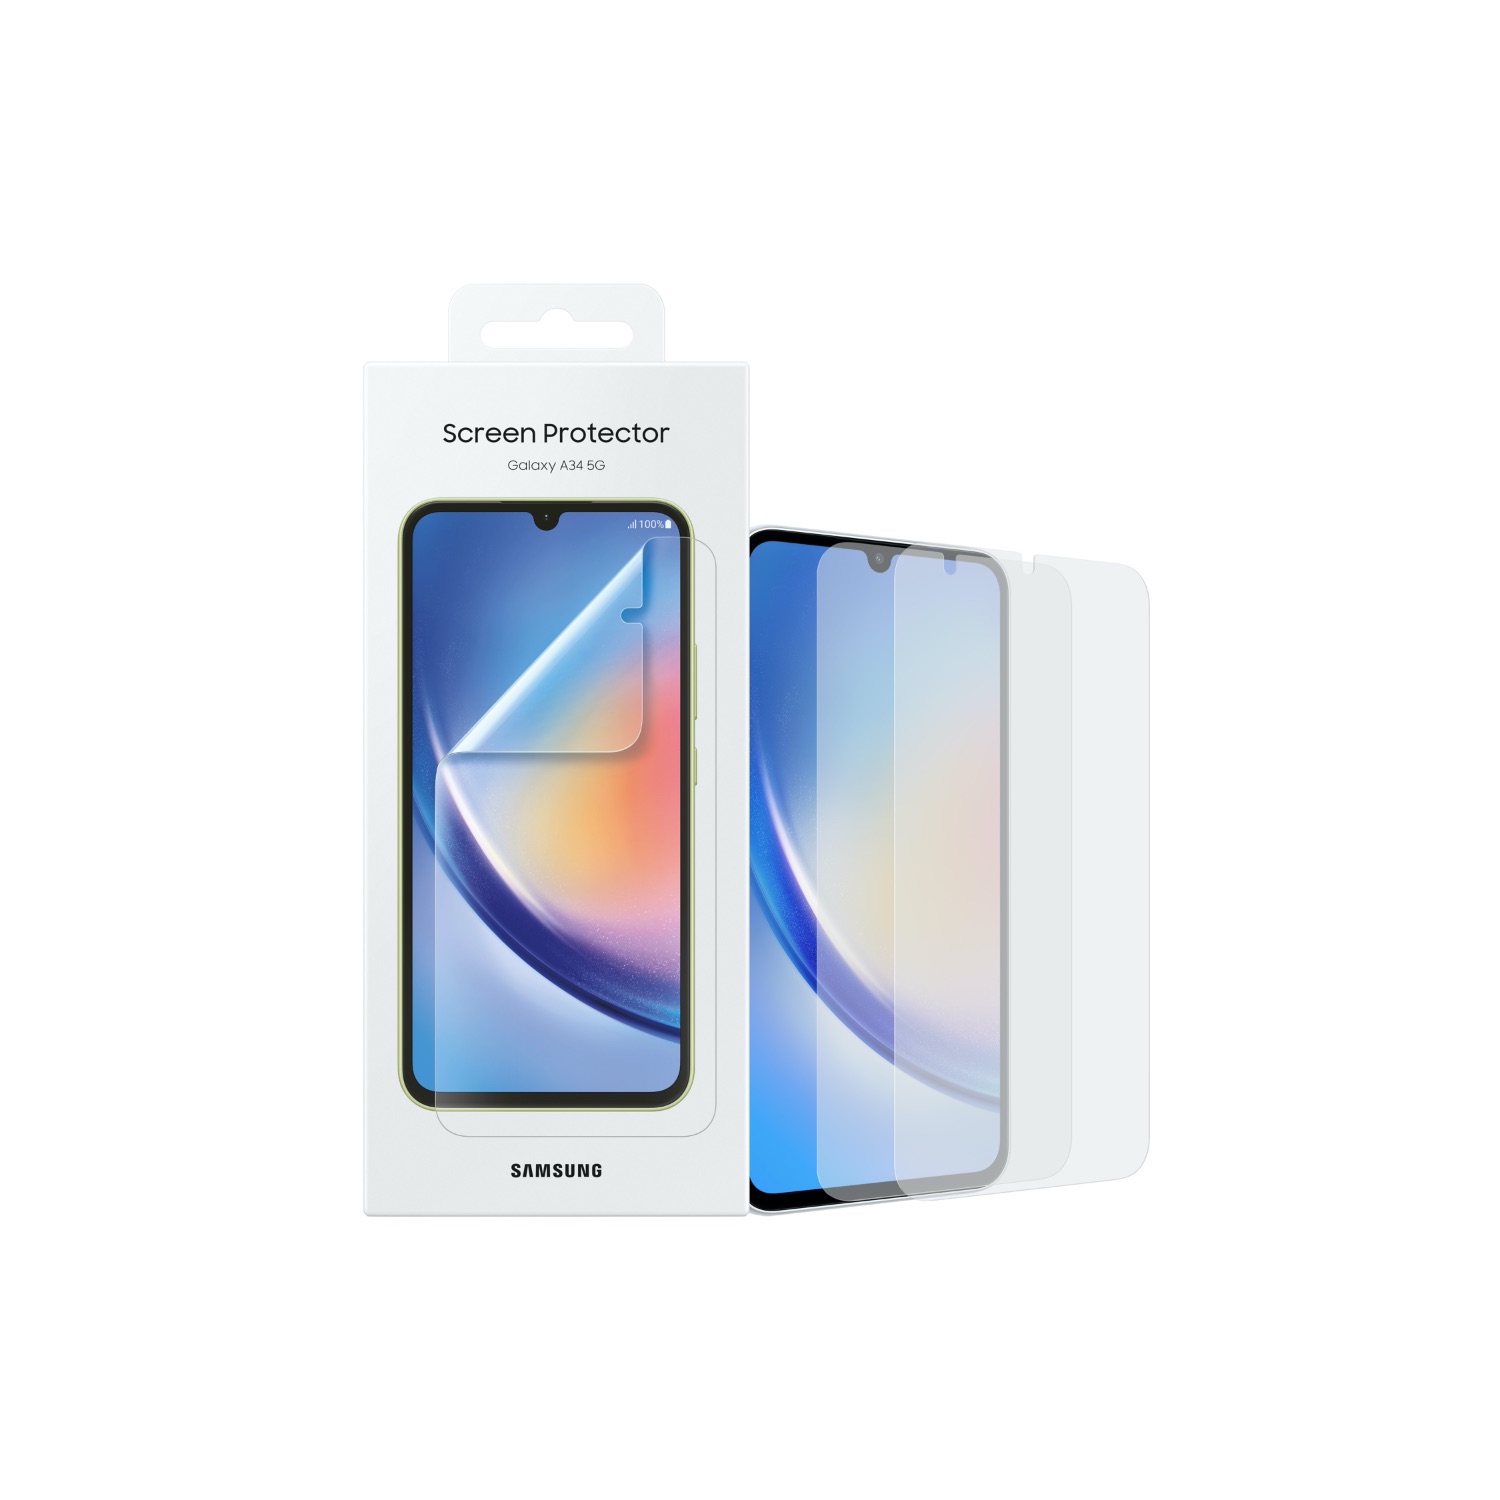 Screen Protectors for the Samsung mobile device